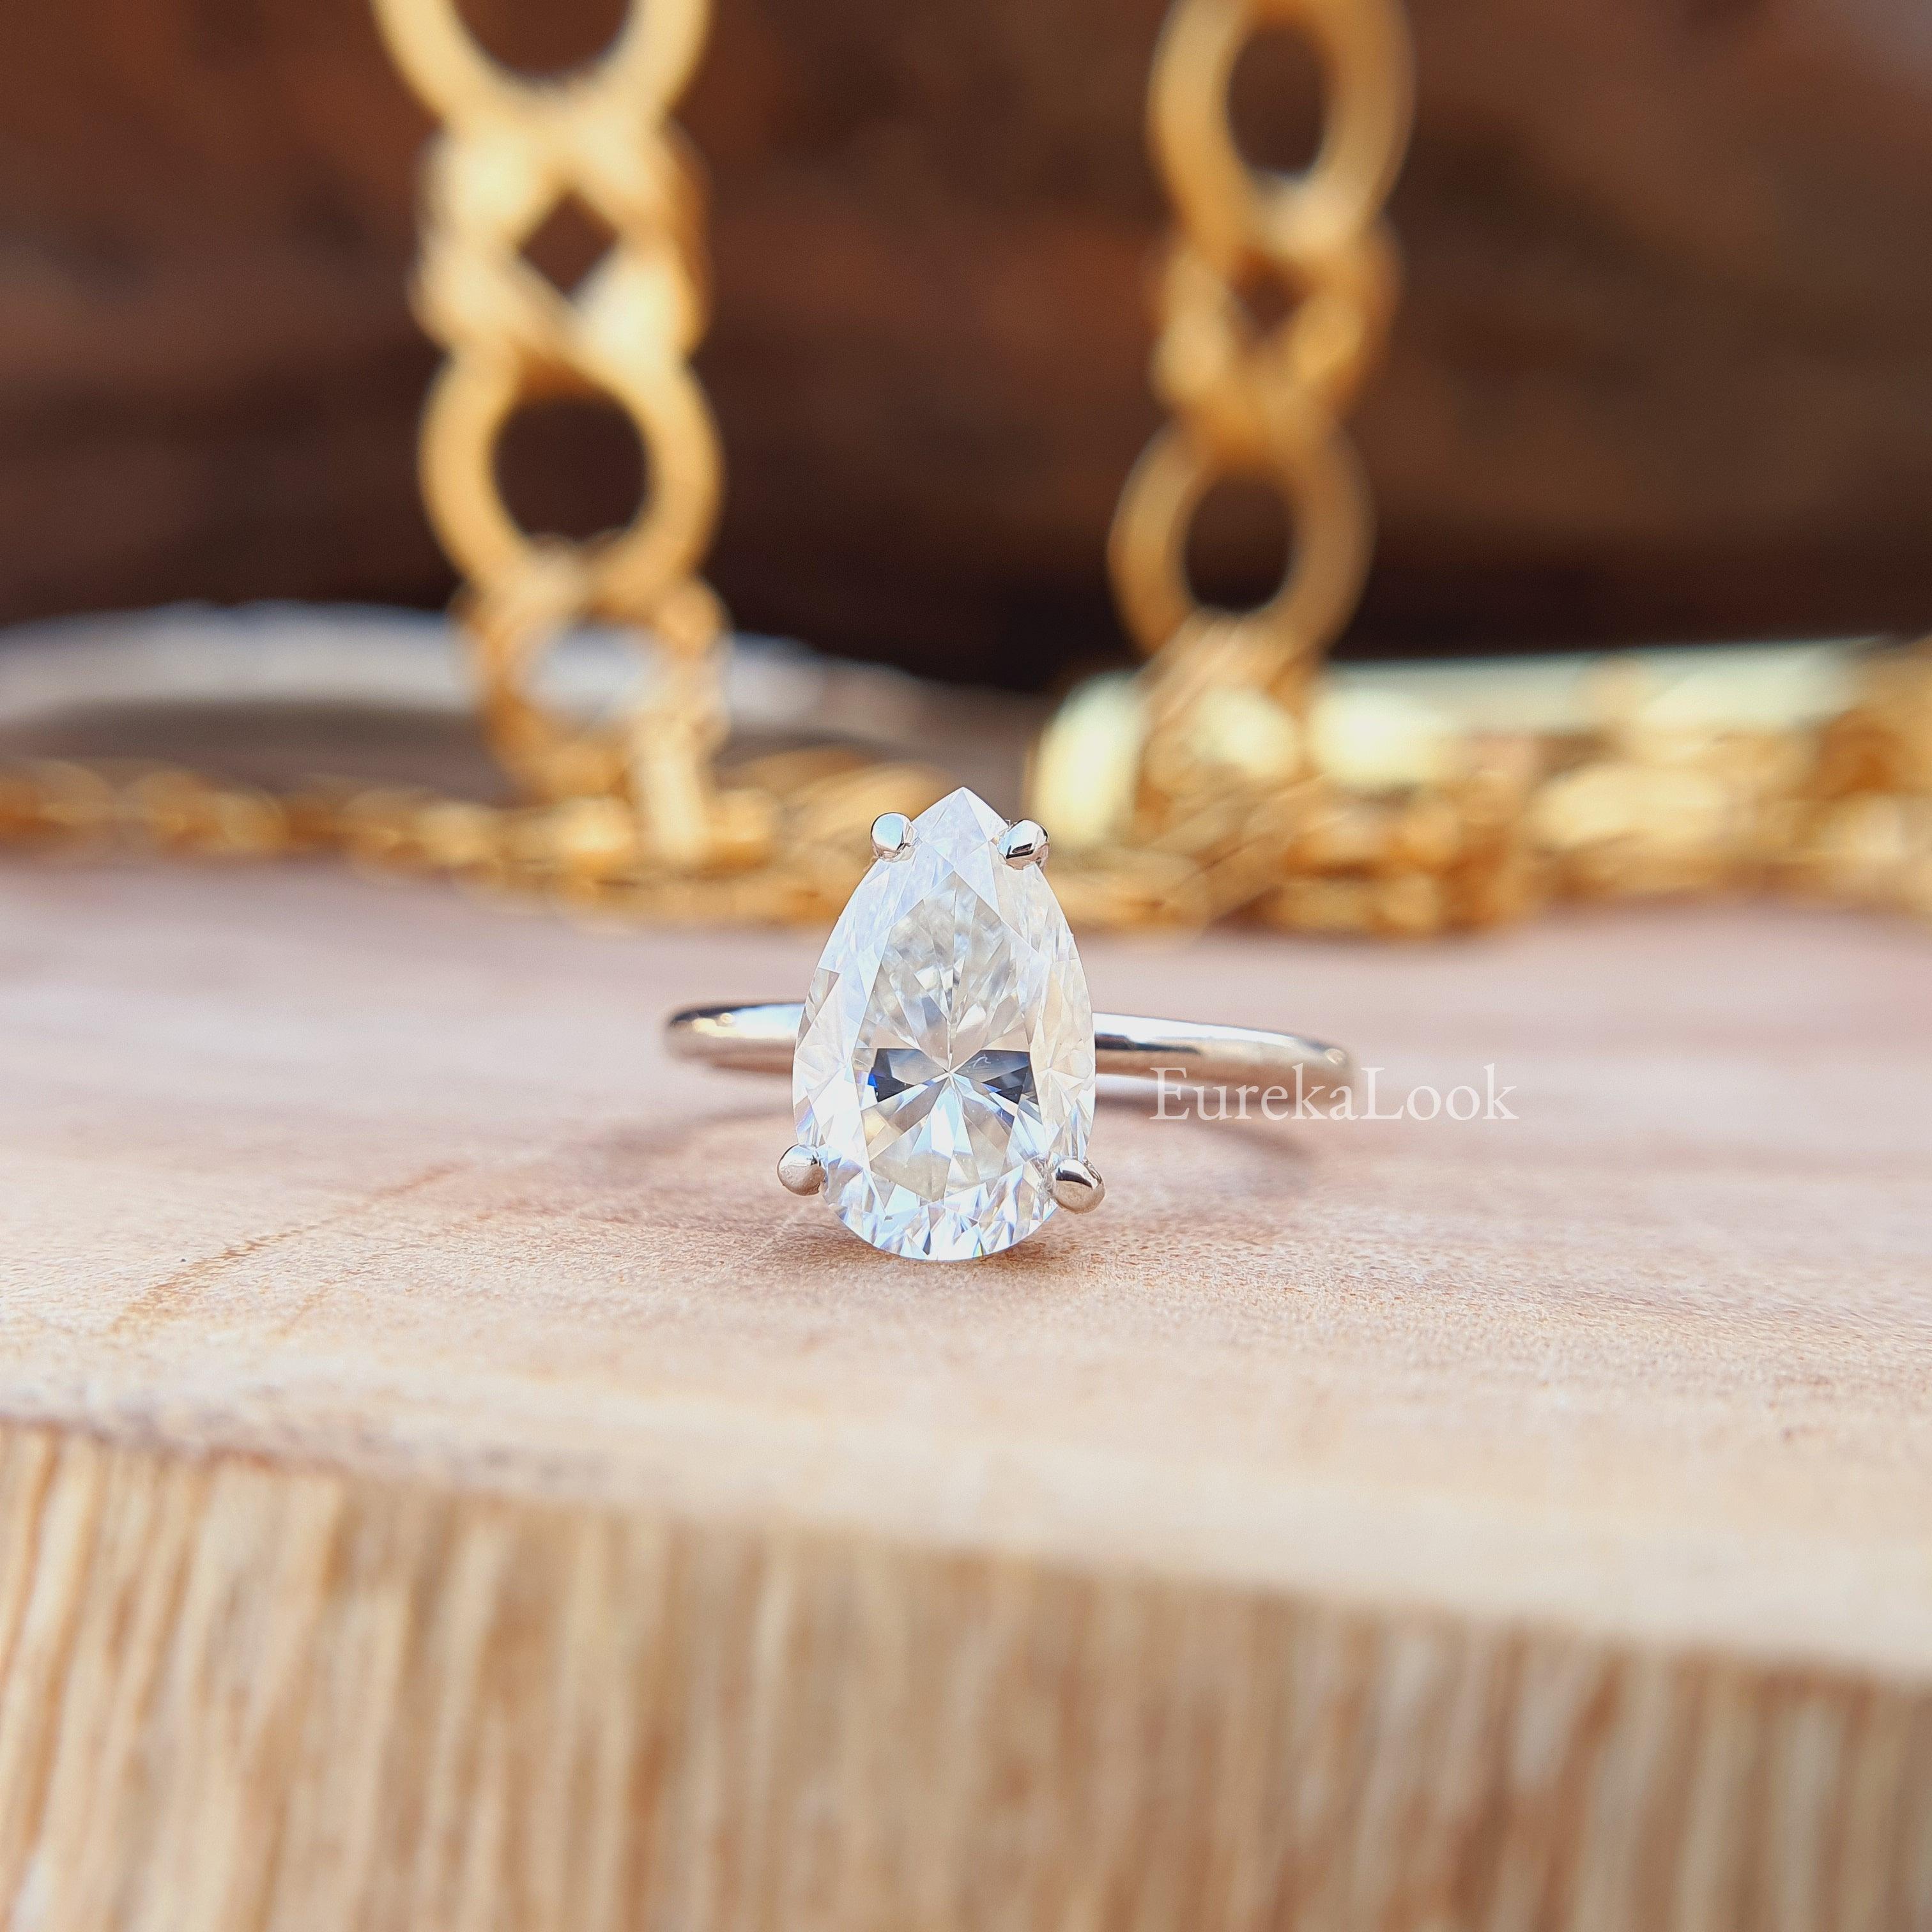 Shop Bridal Jewelry and Wedding Jewelry | Sylvie | Flower engagement ring,  Unique engagement rings, Nature inspired engagement ring